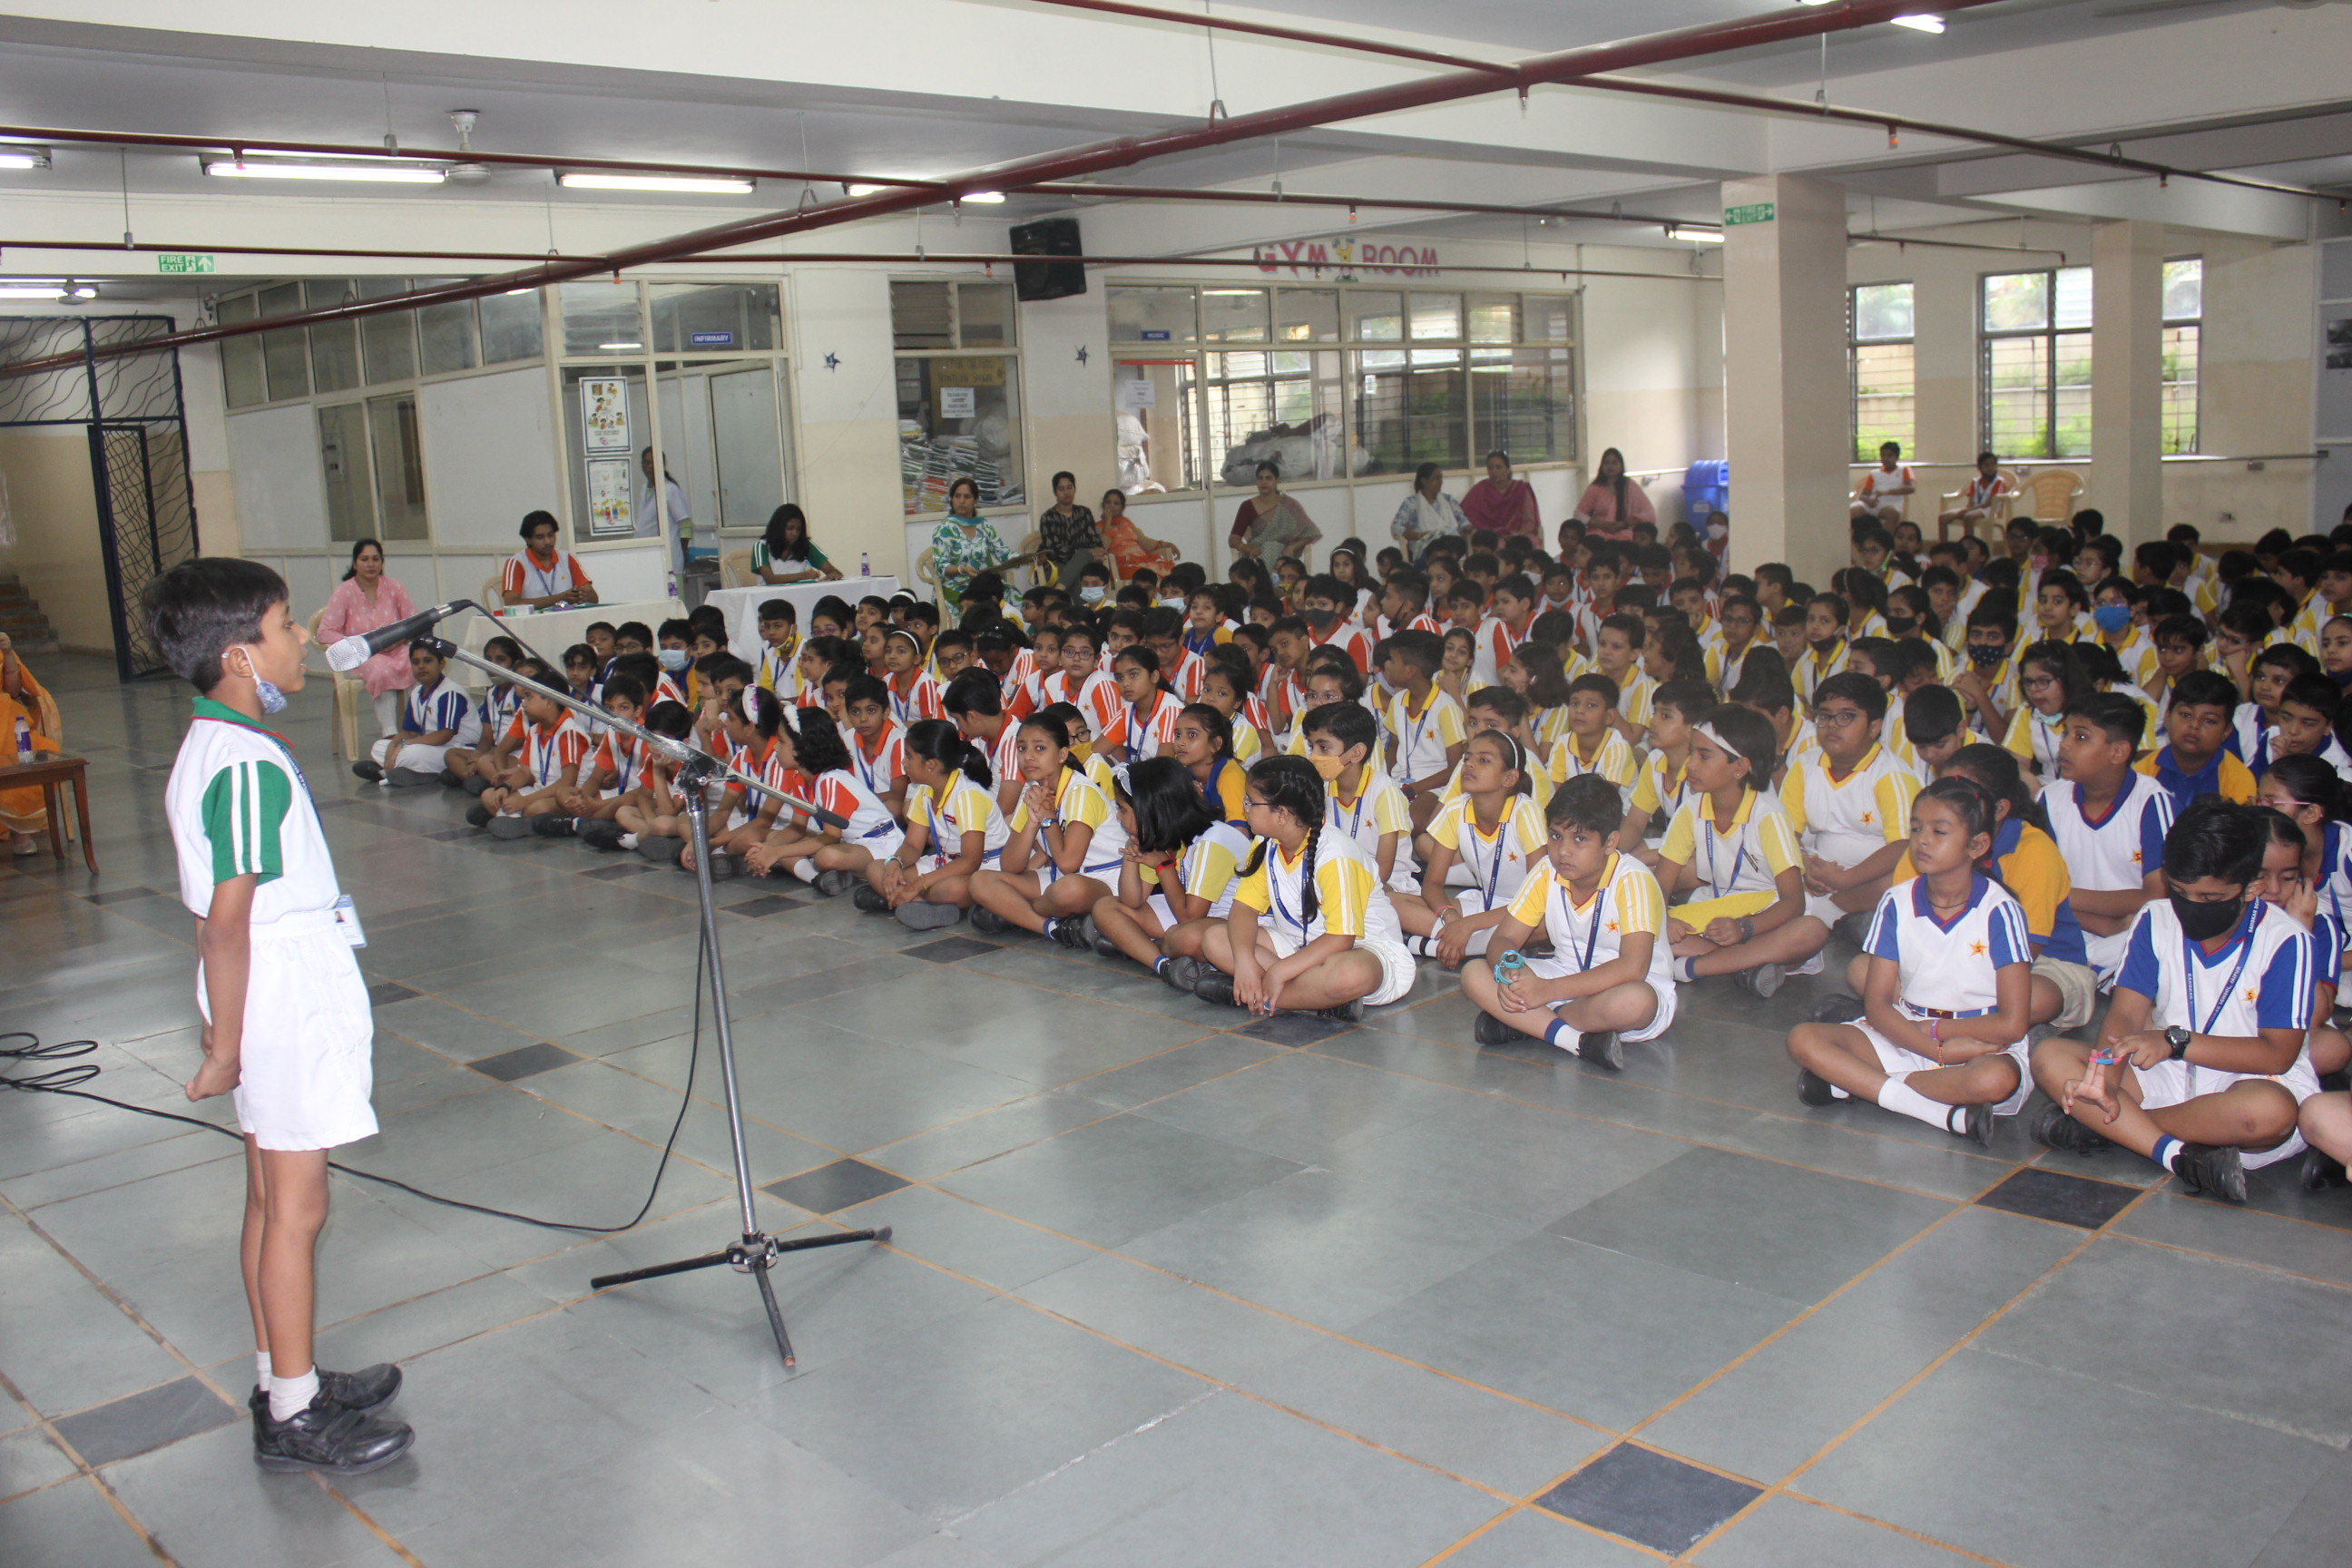 Inter House English Elocution Competition